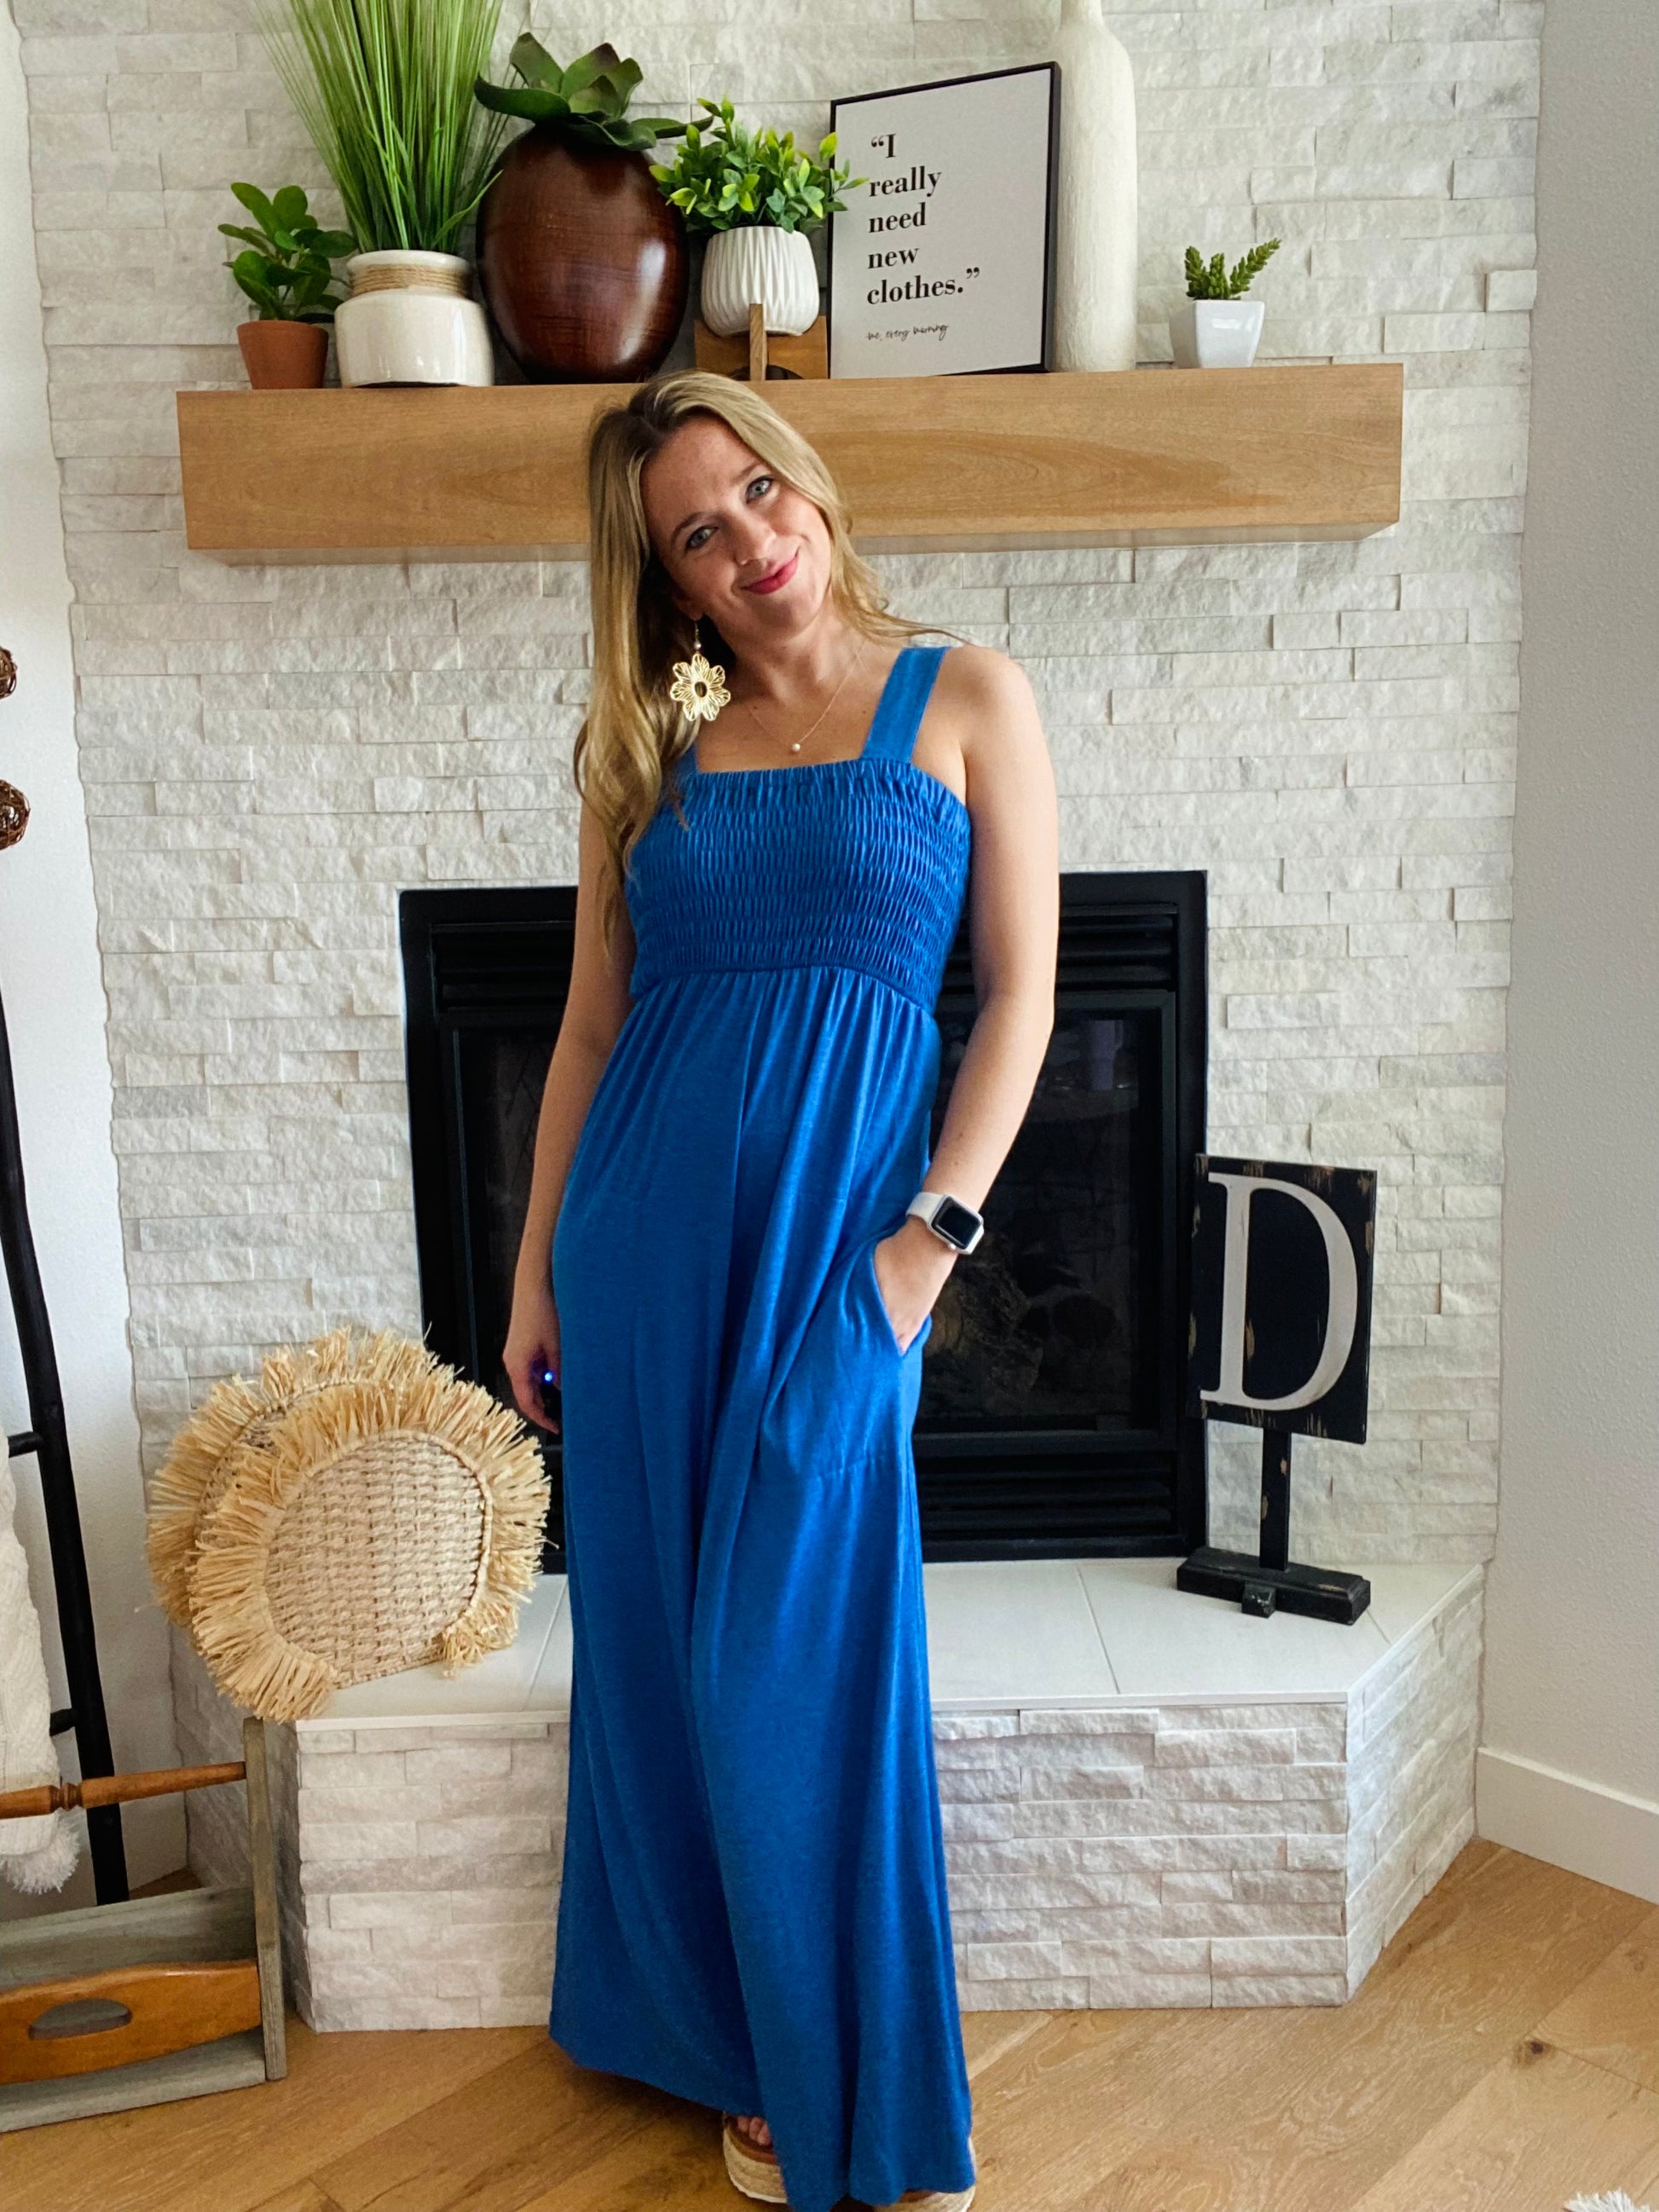 Make a statement in this eye-catching smocked jumpsuit! This chic, deep blue one-piece has a surprisingly stretchy material, comfortable enough for all-day wear. Say goodbye to jeans and welcome this wide-leg stunner with stylish smocked detailing!